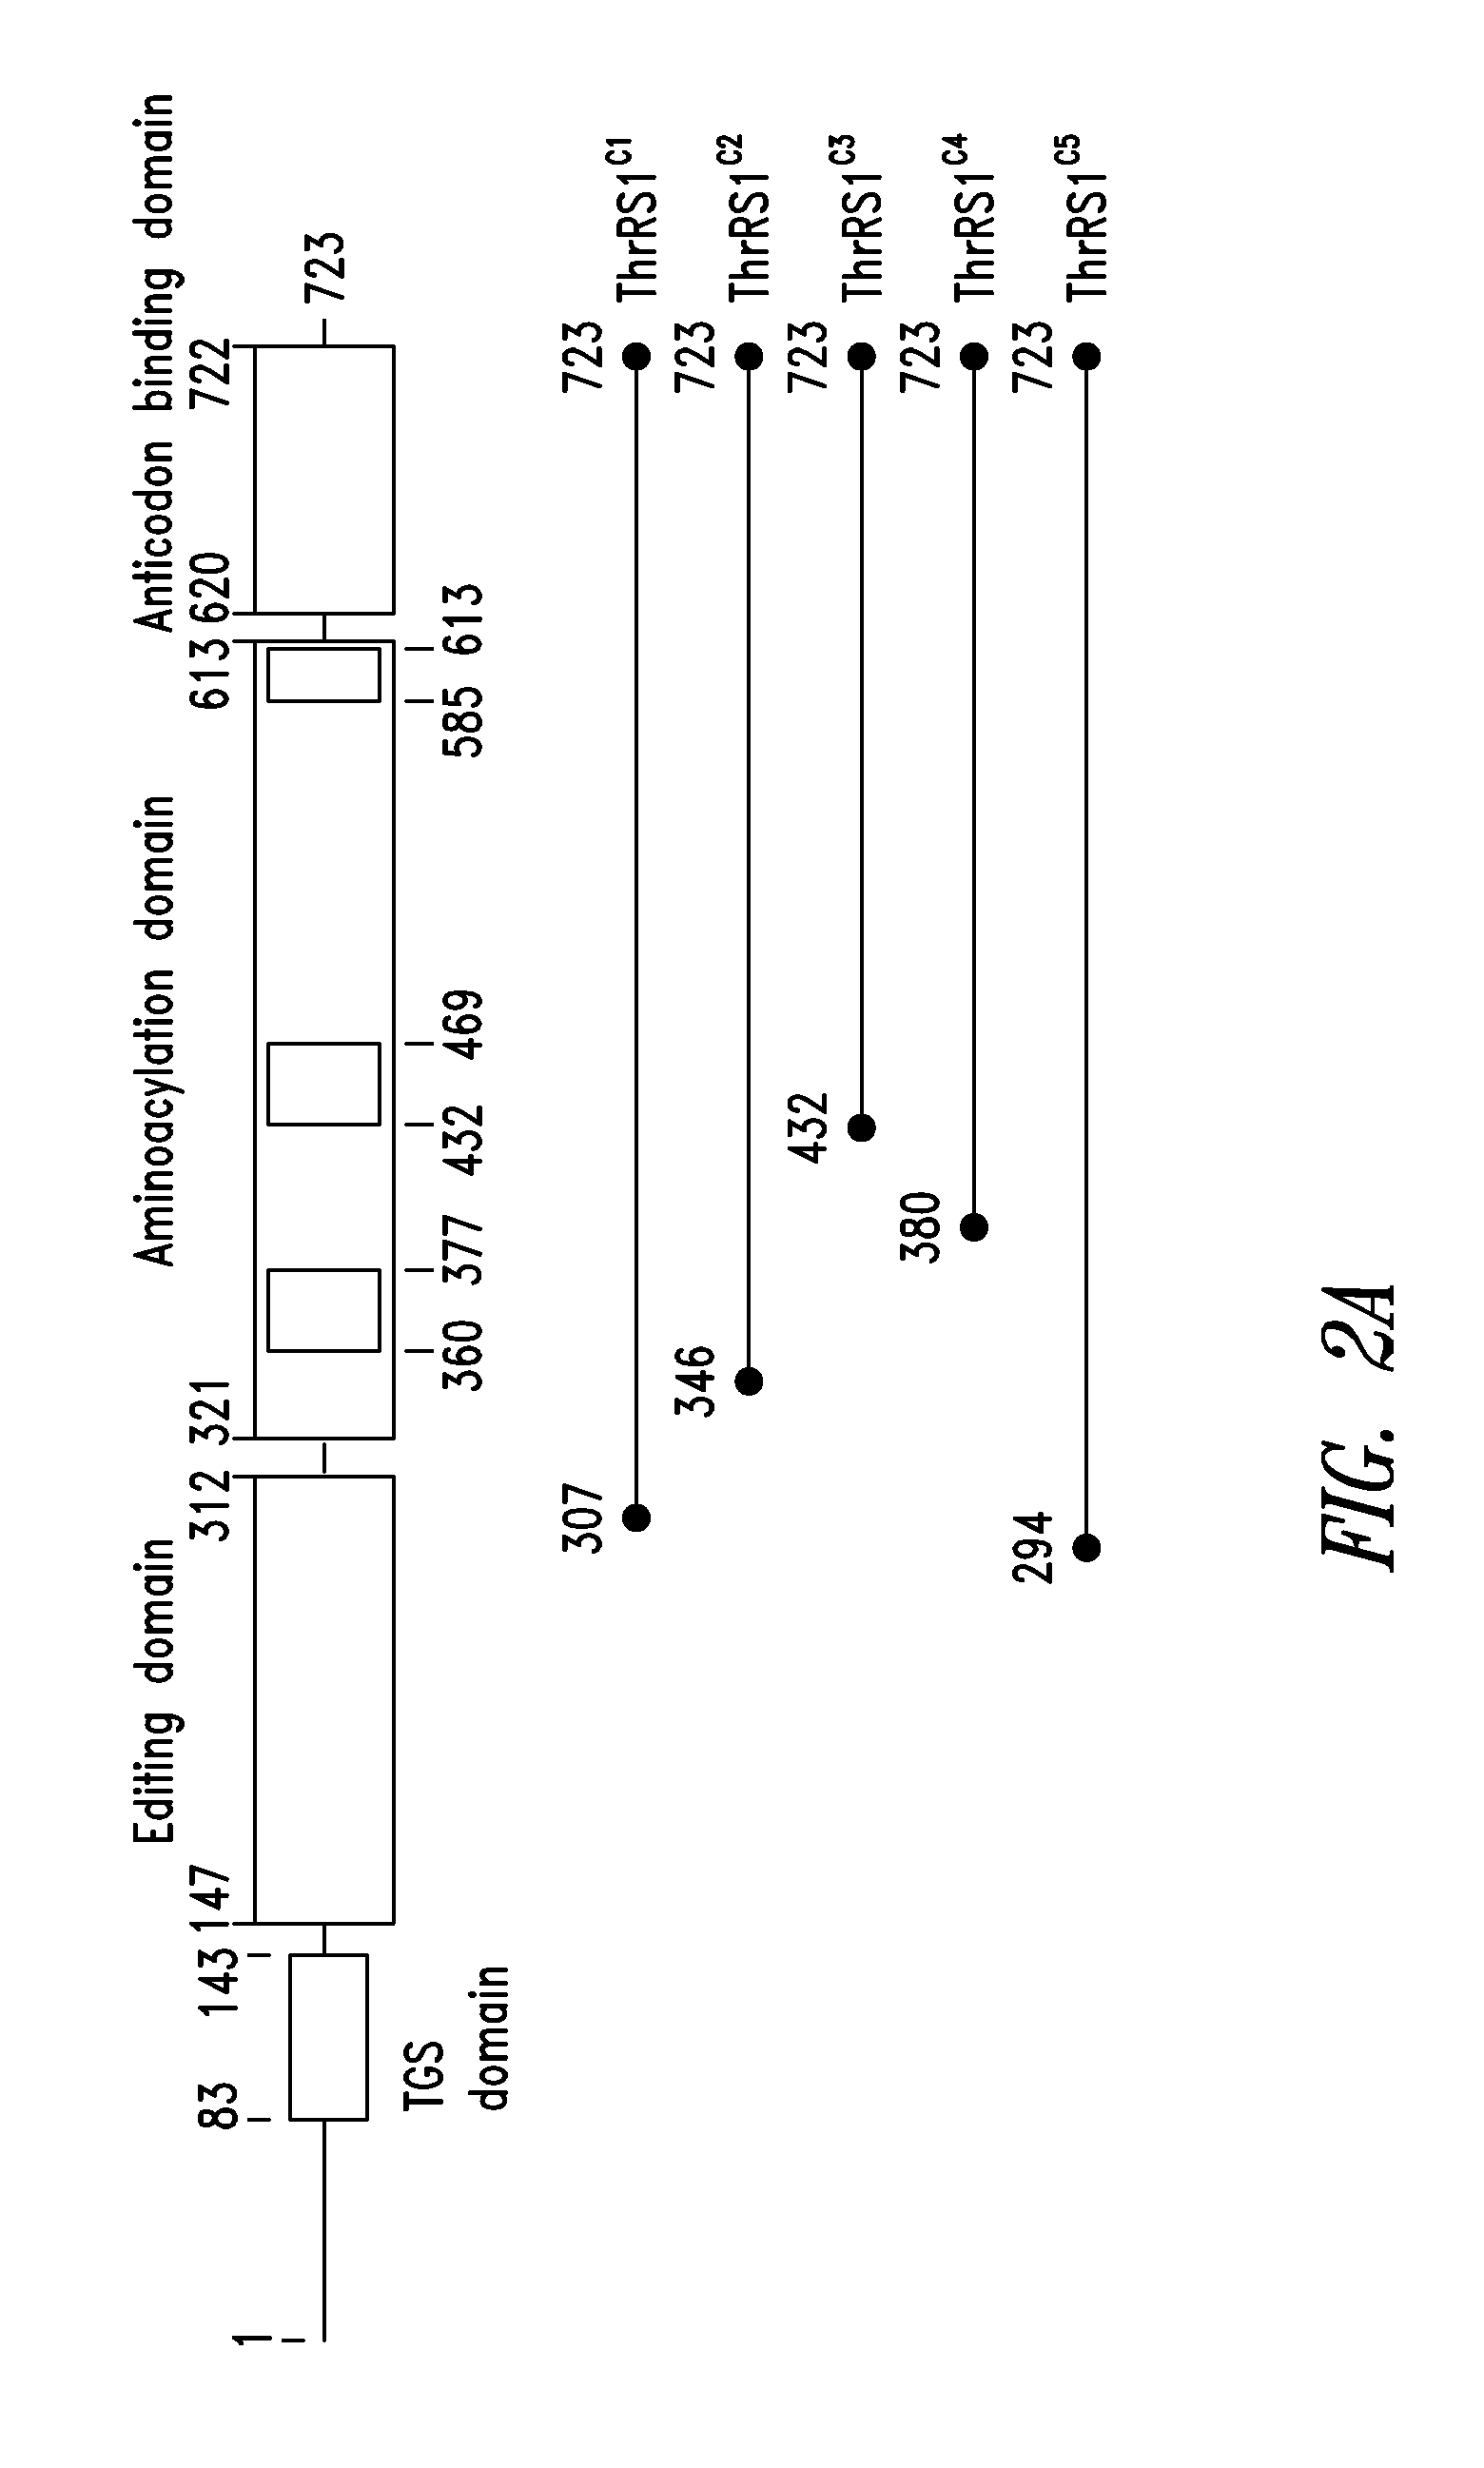 Innovative discovery of therapeutic, diagnostic, and antibody compositions related to protein fragments of threonyl-trna synthetases